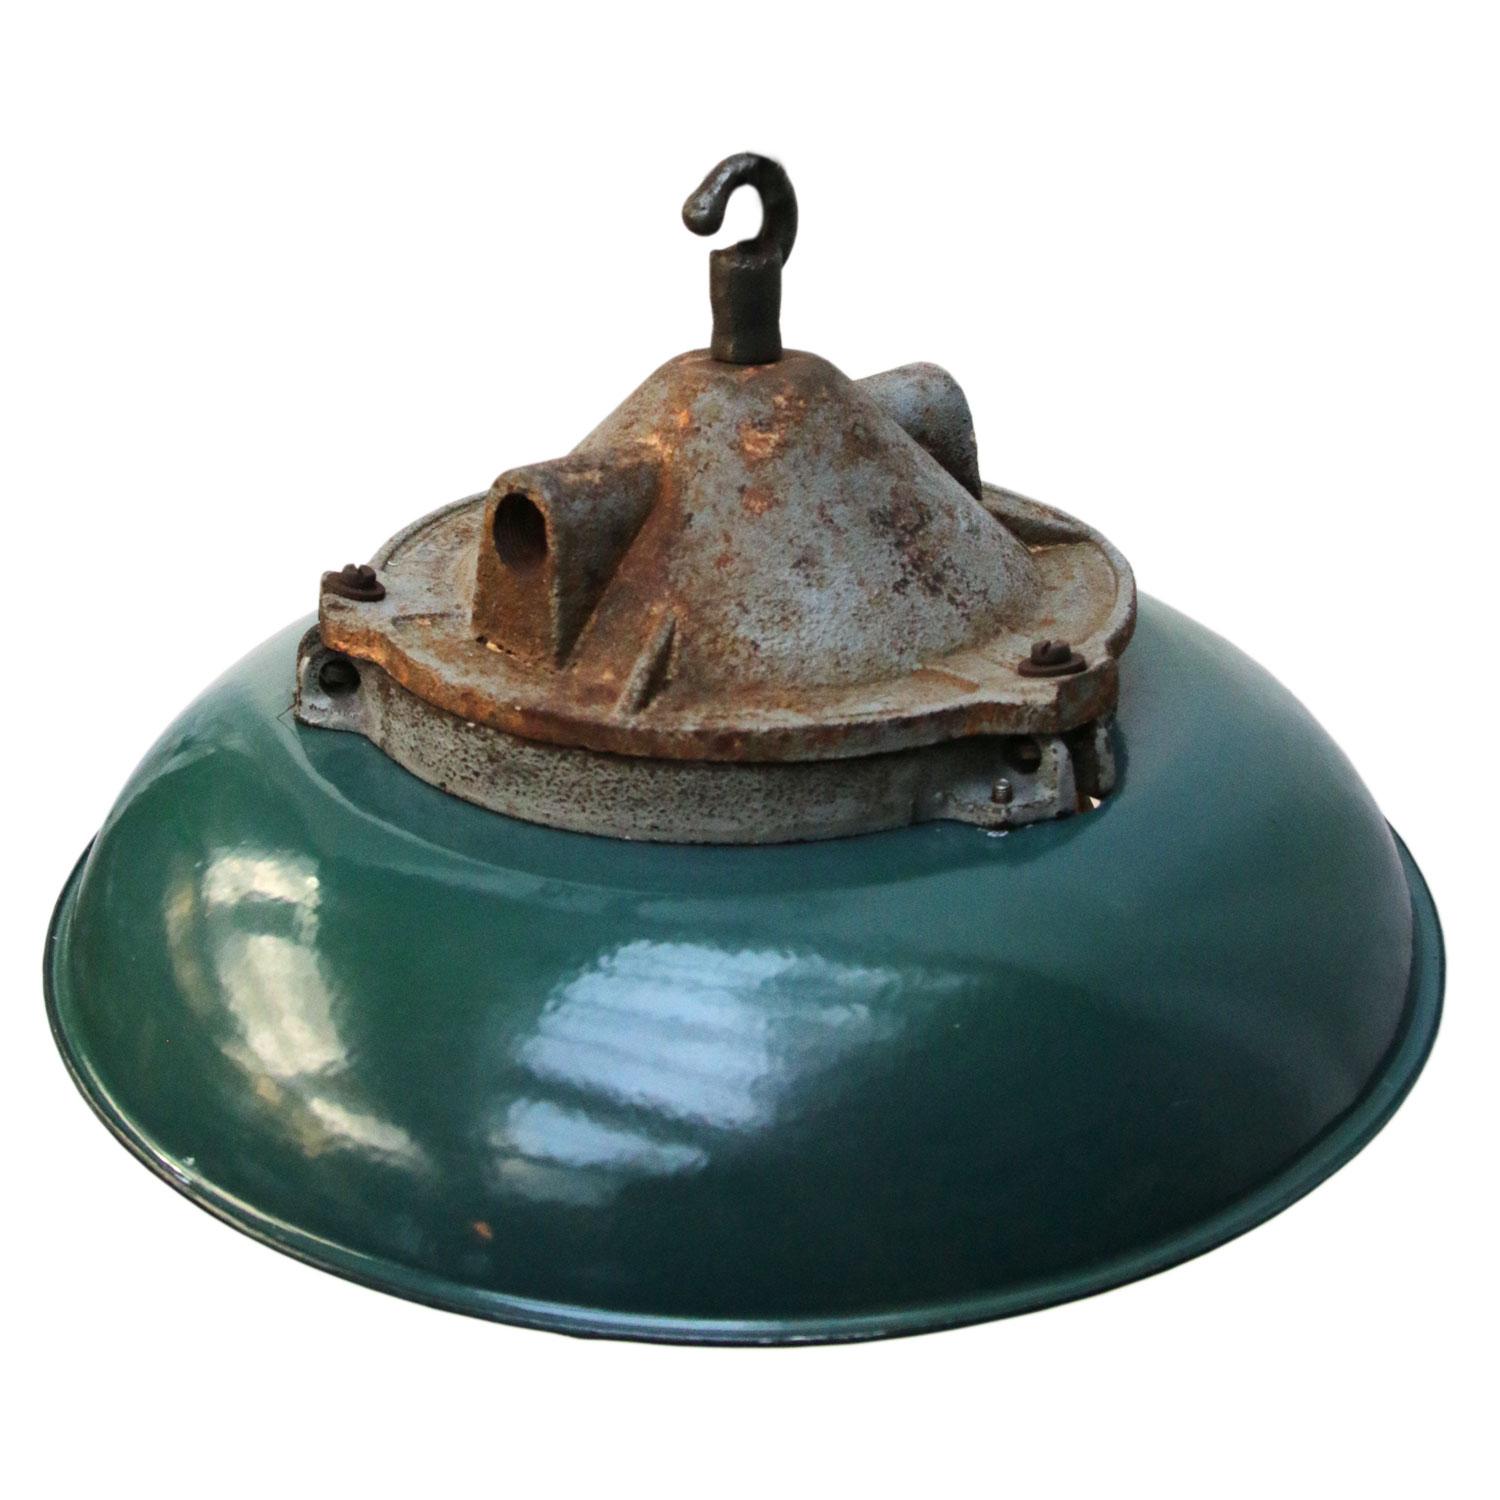 Industrial factory pendant. Green enamel shade.
Cast iron top. Holophane glass.

Weight: 6.0 kg / 13.2 lb

All lamps have been made suitable by international standards for incandescent light bulbs, energy-efficient and LED bulbs. E26/E27 bulb